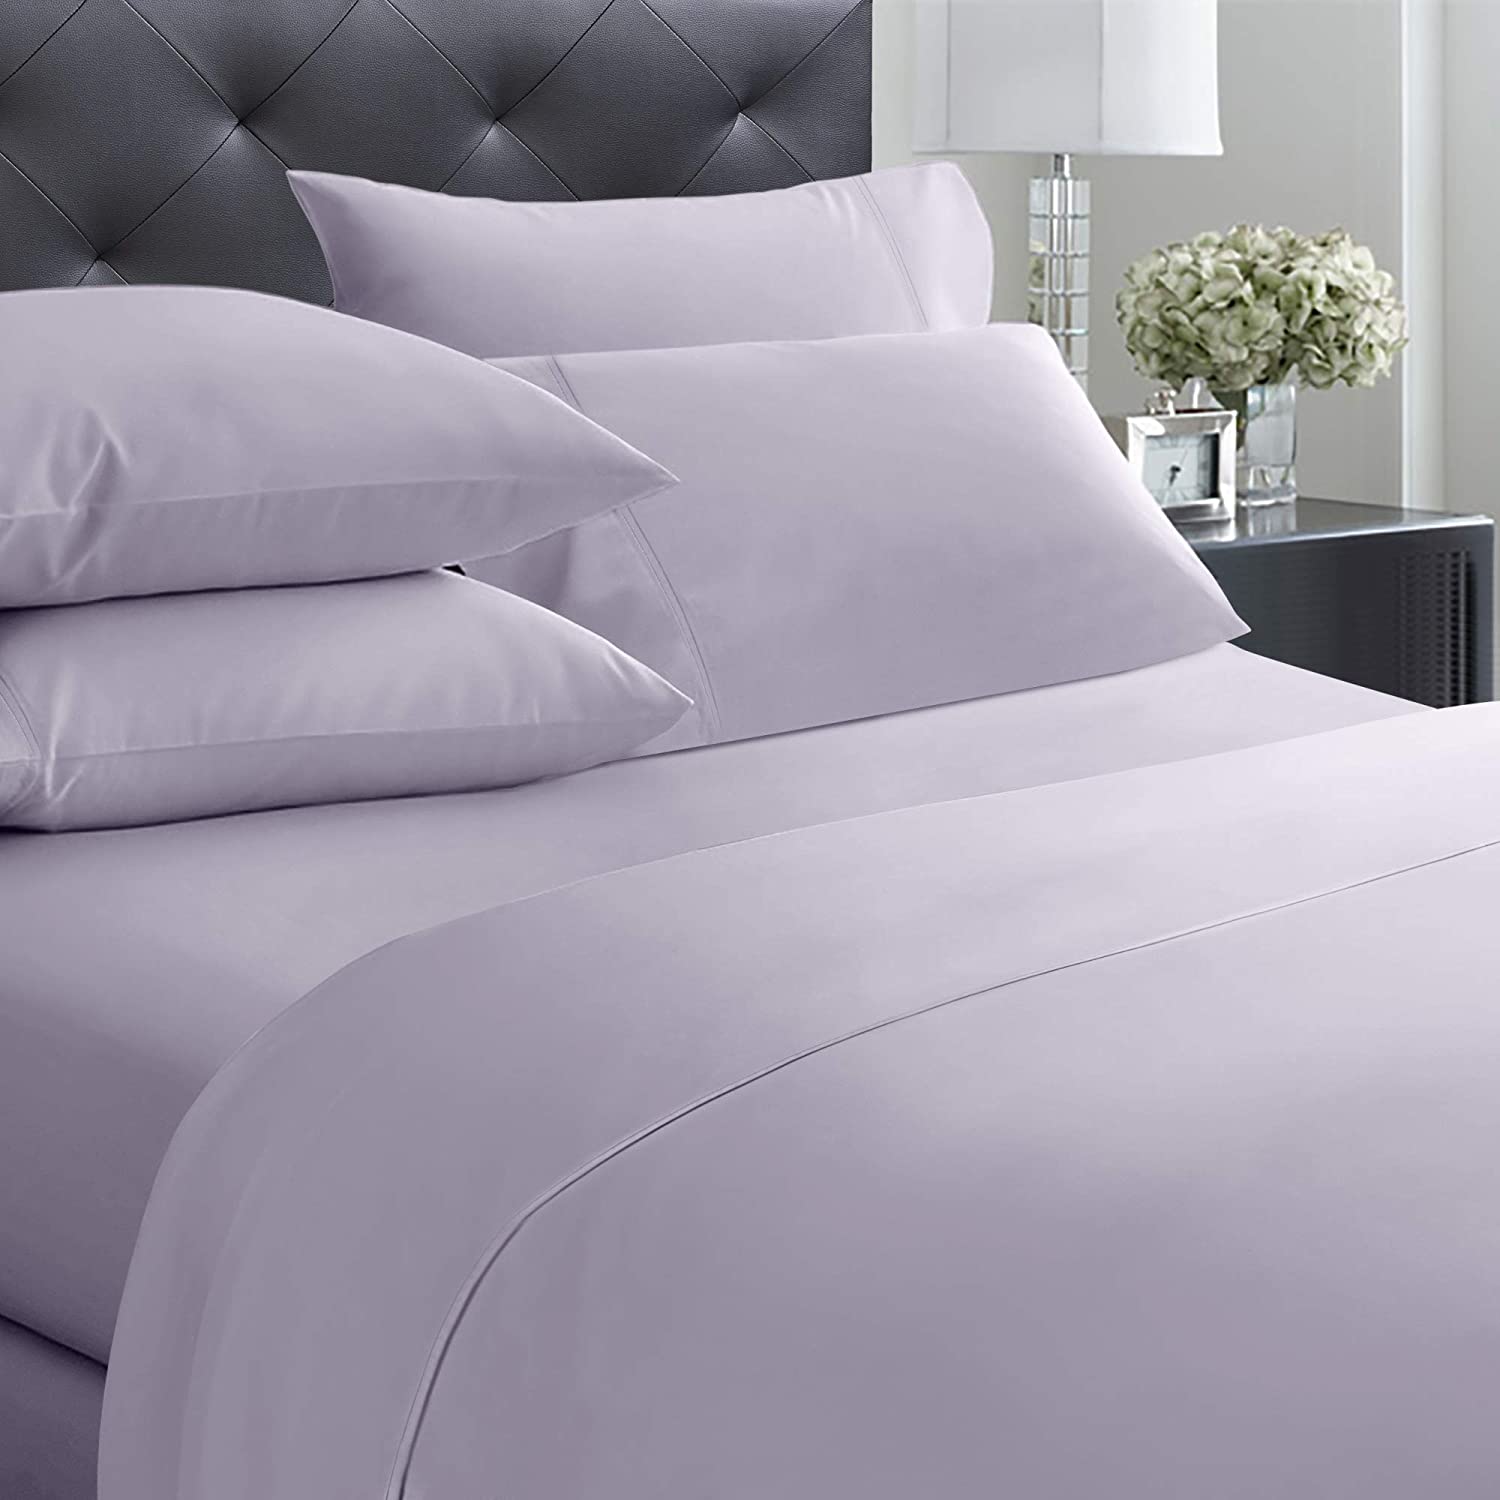 TC 400 Plain Dyed 100 % Pure Egyptian Cotton Flat Bed Sheets All Sizes luxury 